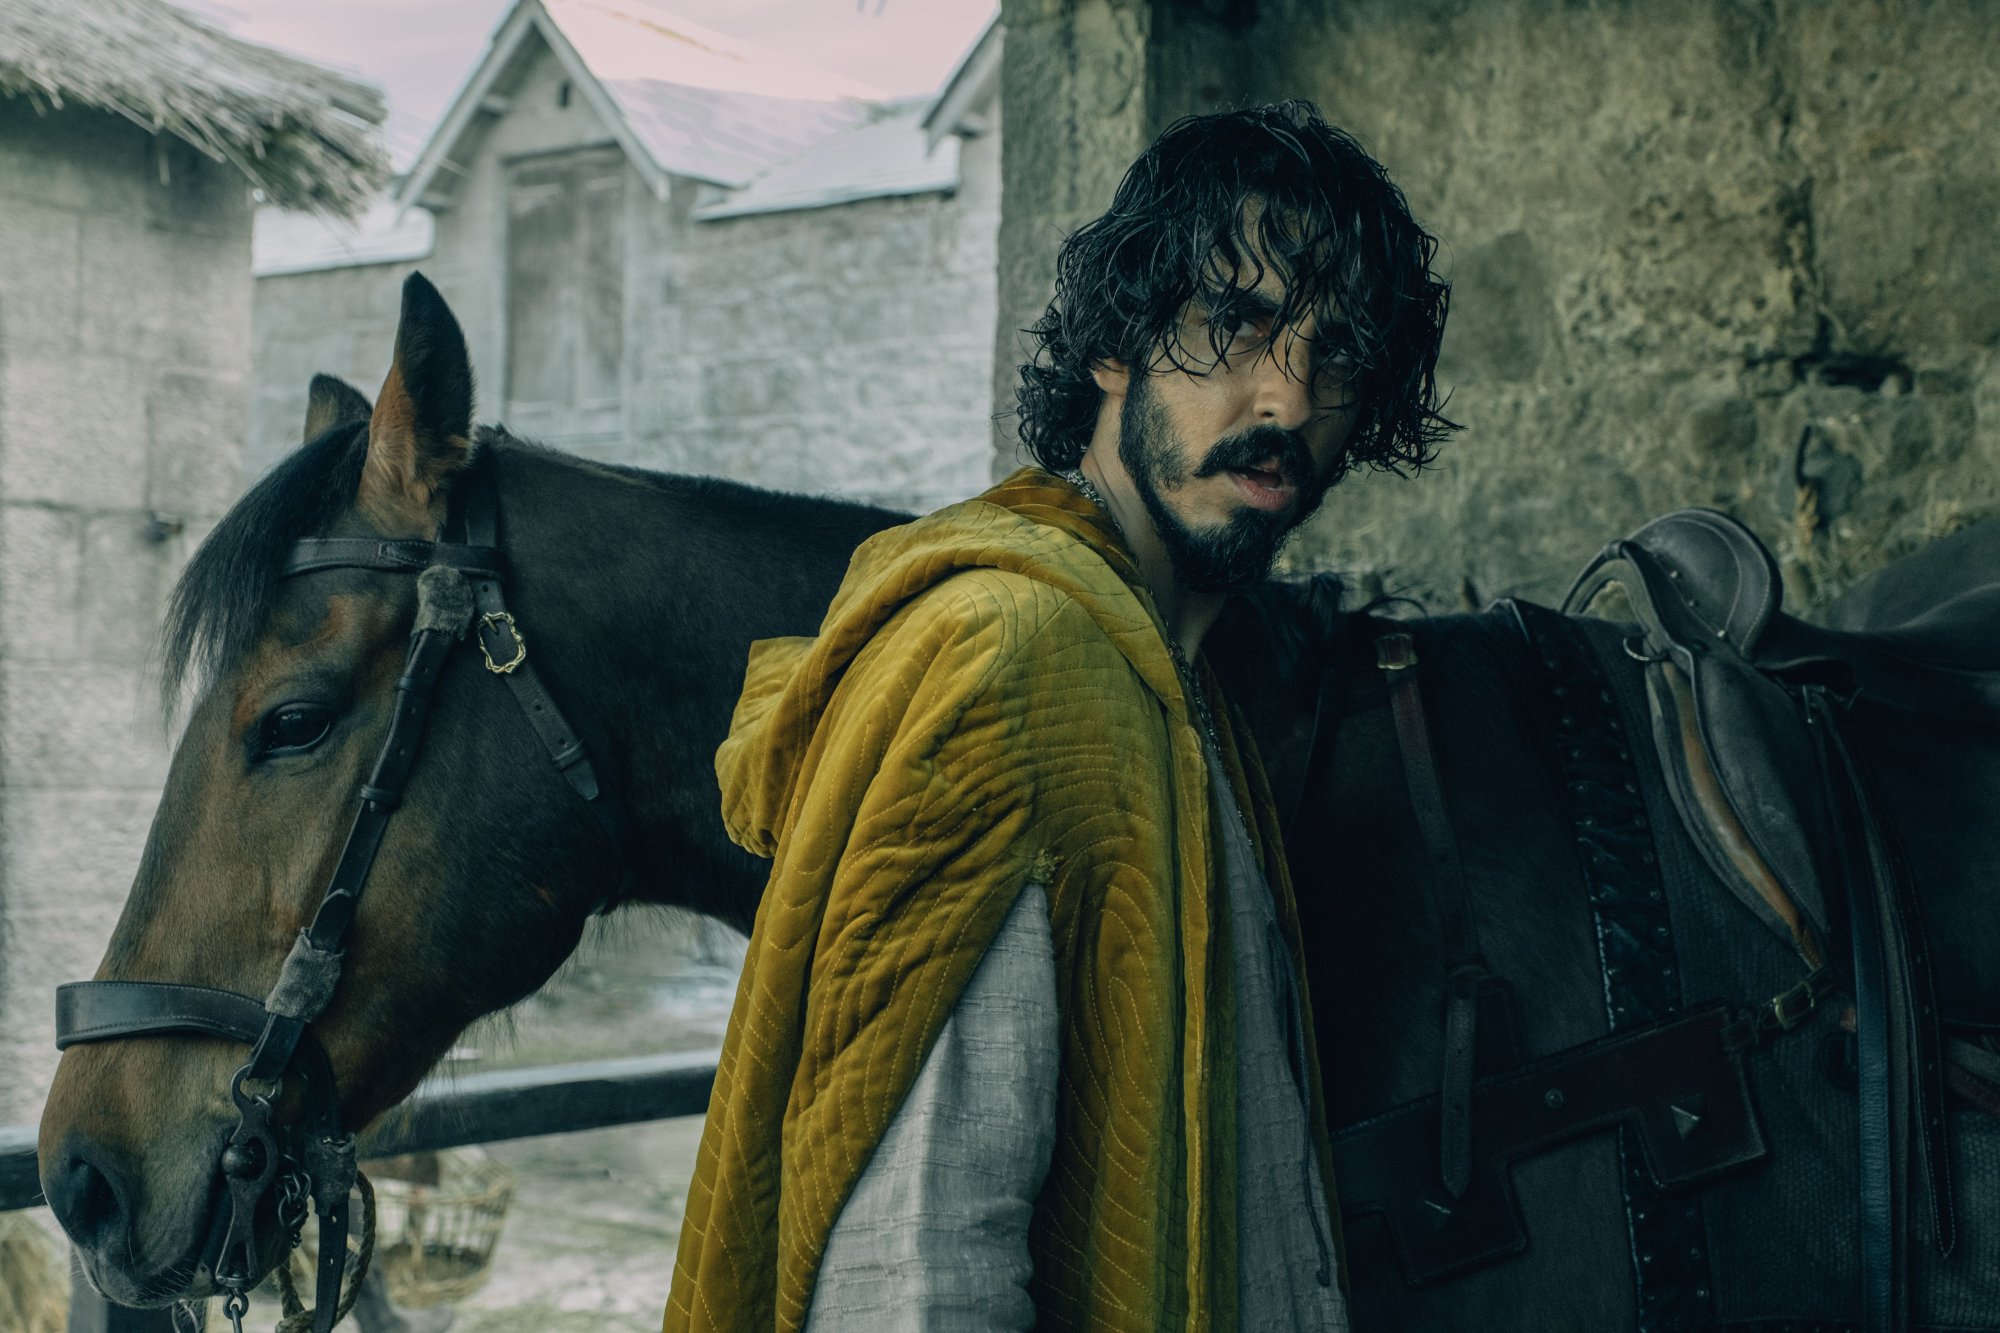 'The Green Knight' star Dev Patel turning in front of a horse